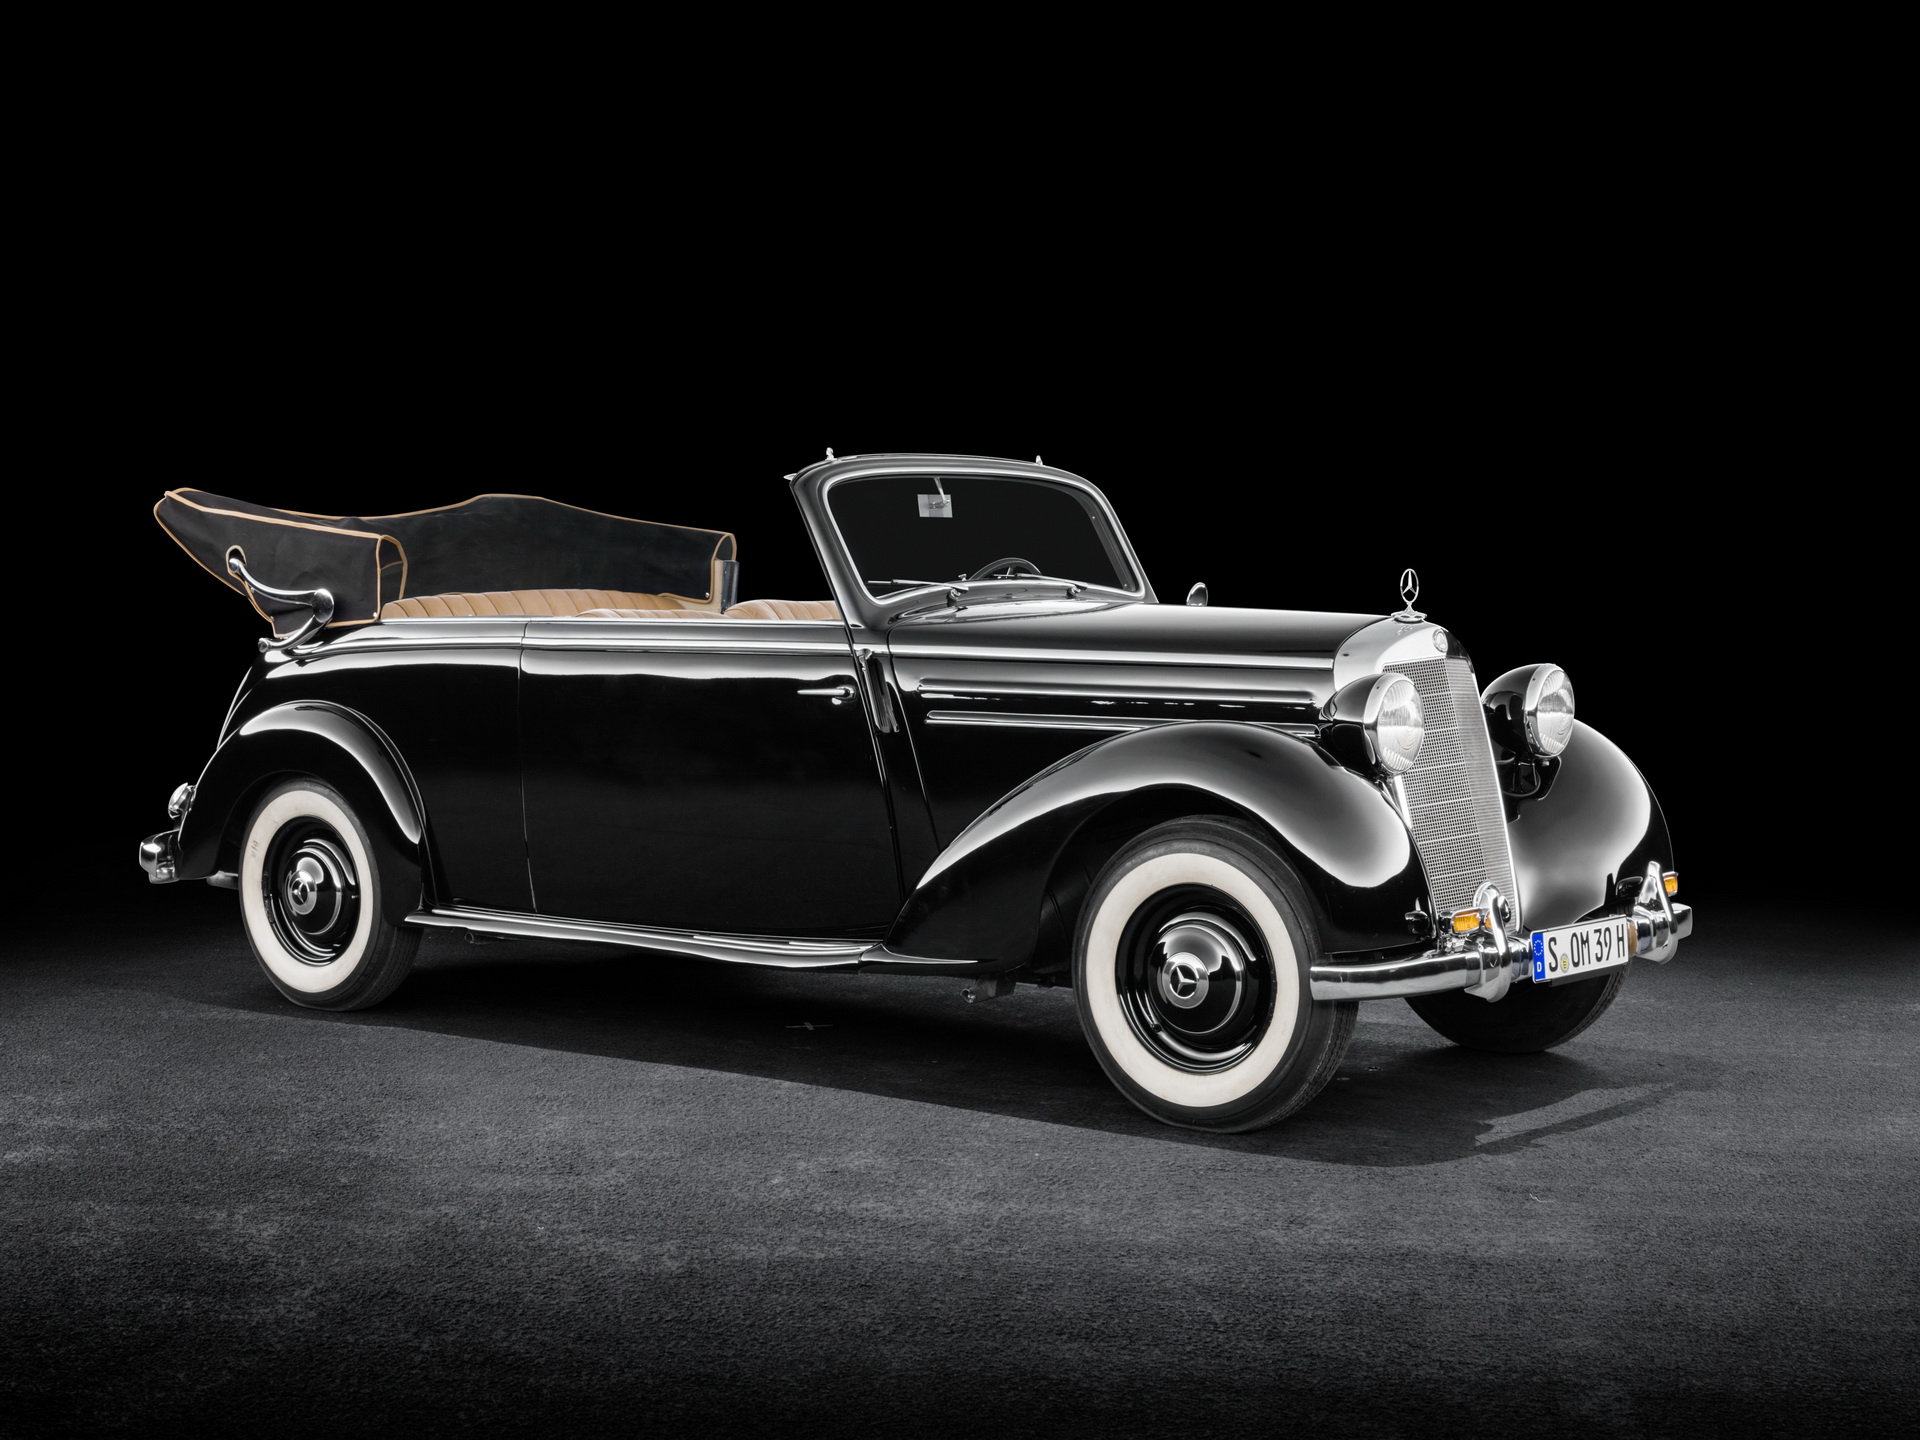 Mercedes-Benz E-Class History From 1926 To 2020: The Tale Of The Essential  Executive Car